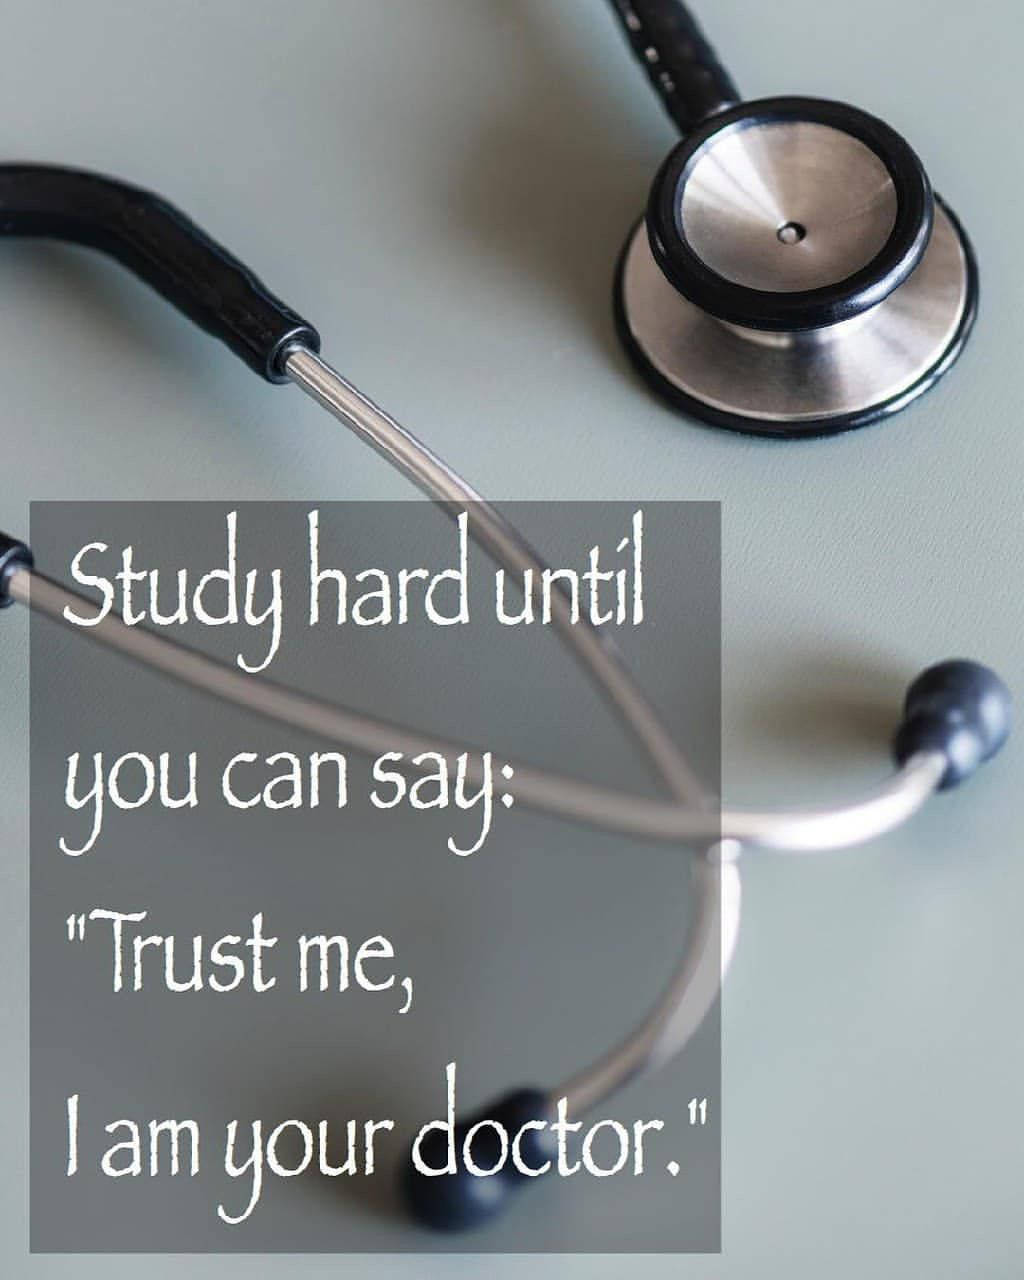 NEET wallpaper | Medical quotes, Future doctor quotes, Exam motivation